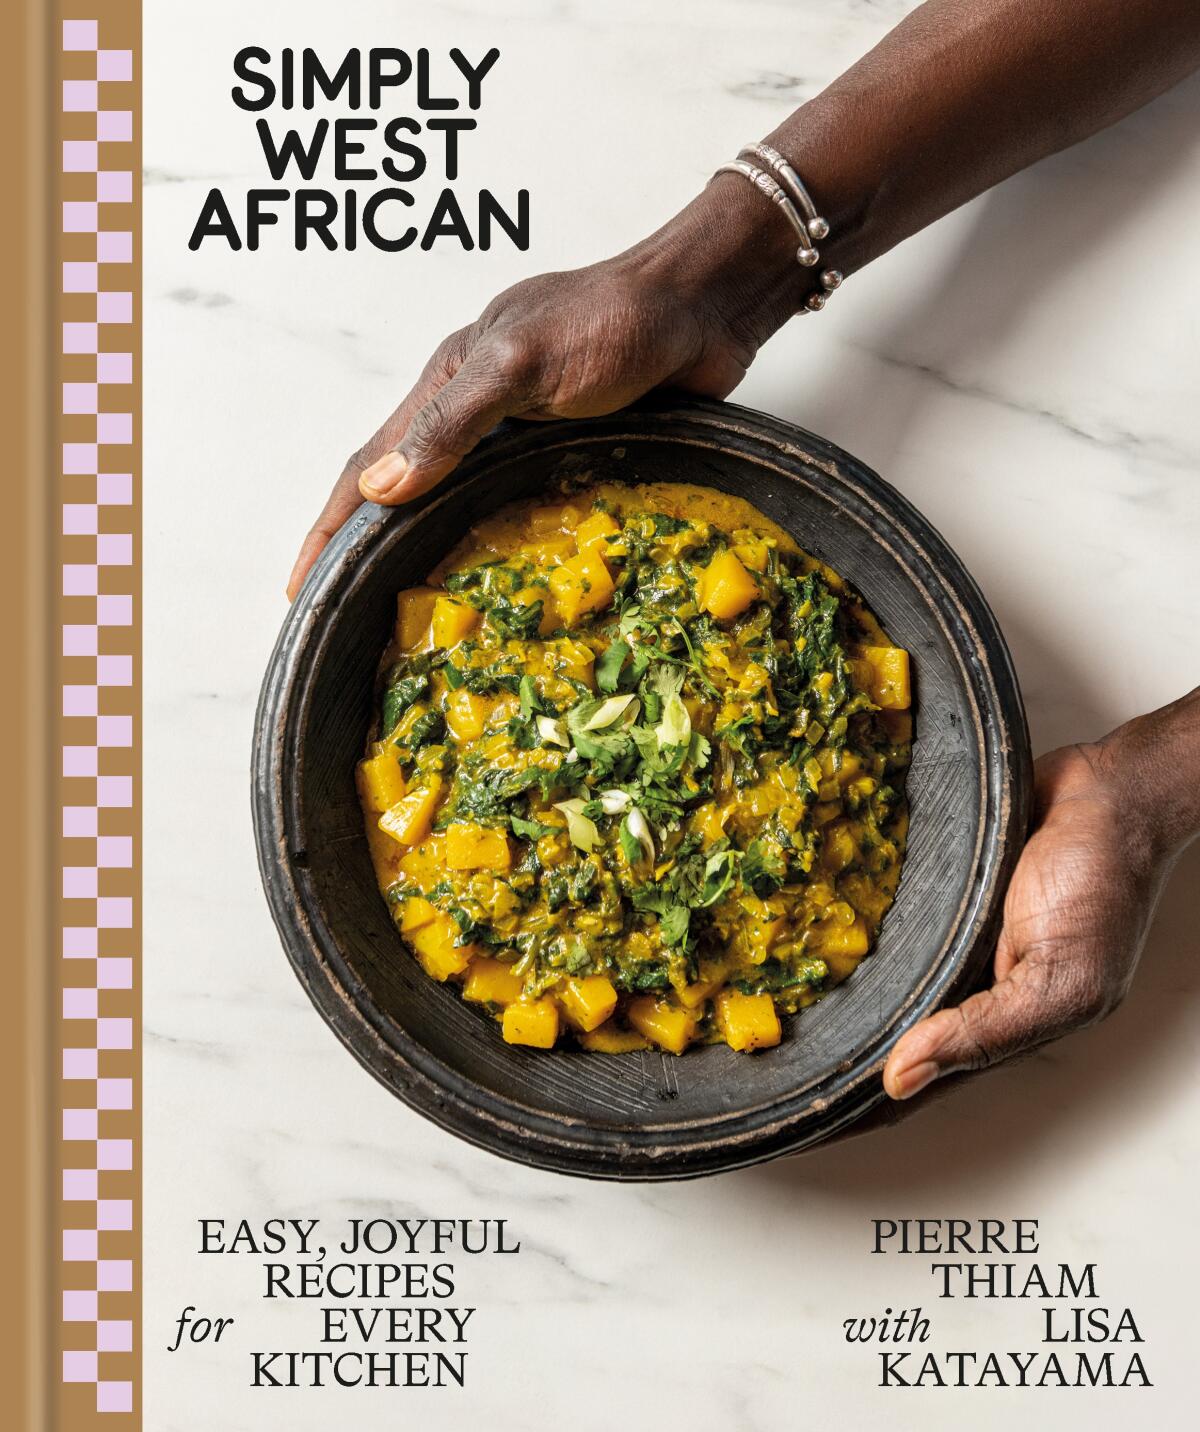 Simply West African by Pierre Thiam with Lisa Katayama